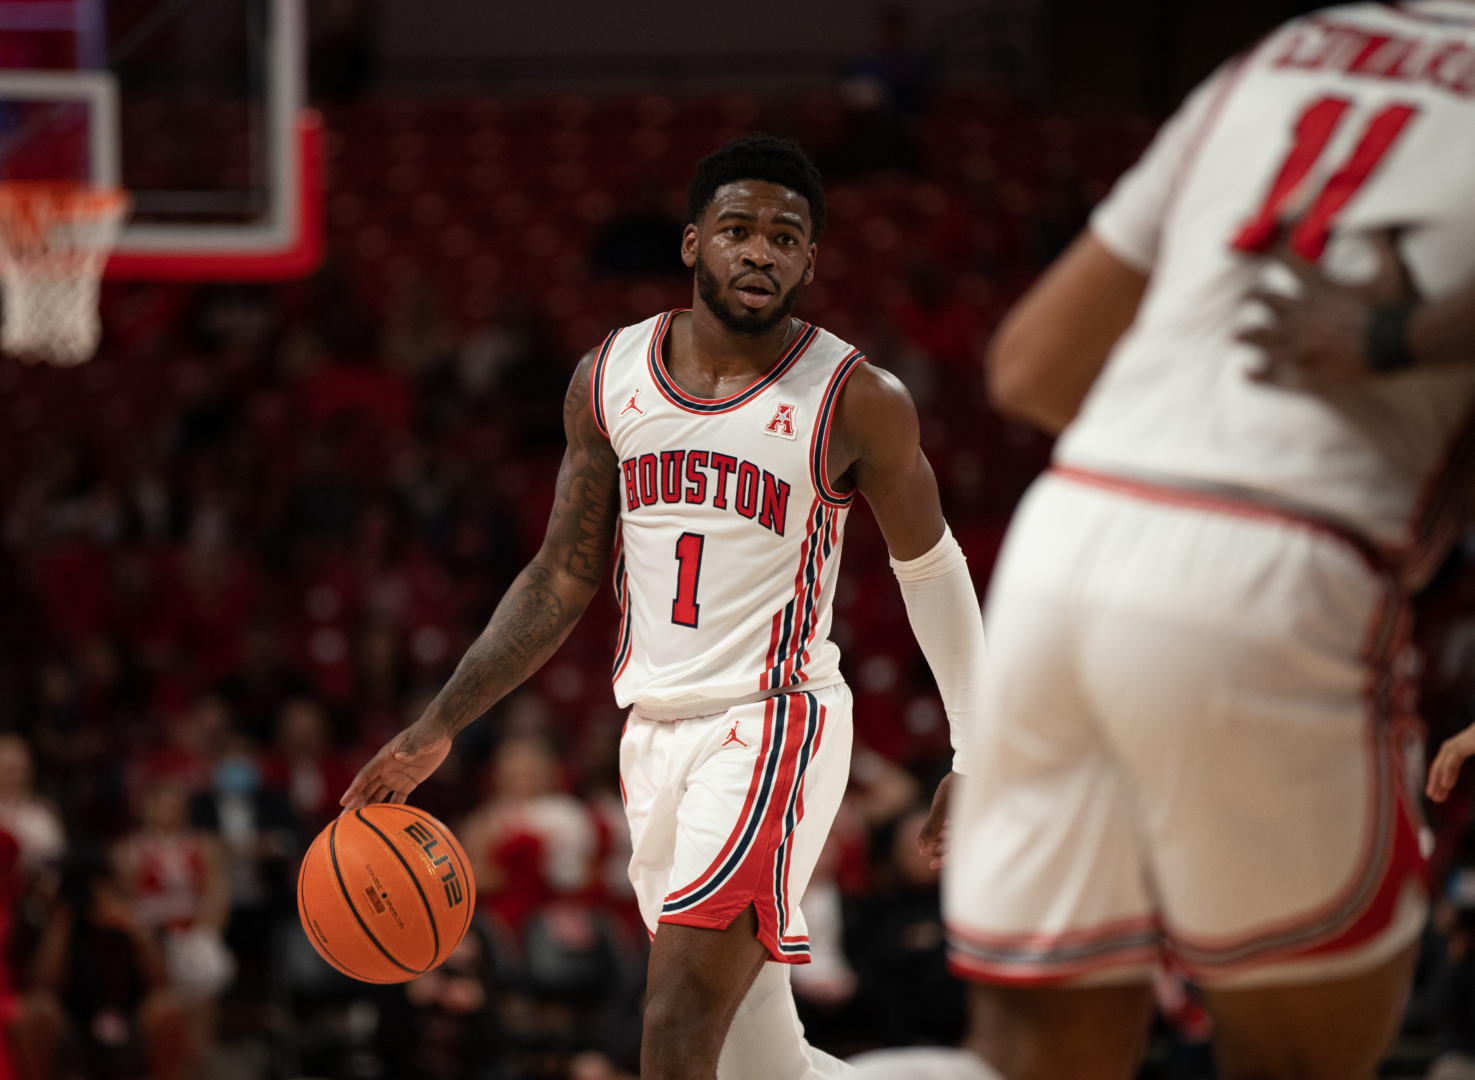 No. 6 Houston got upset by the SMU Mustangs 85-83 Wednesday night, ending the Cougars' 12 game win streak, suffering its first loss in conference play. | Sean Thomas/The Cougar